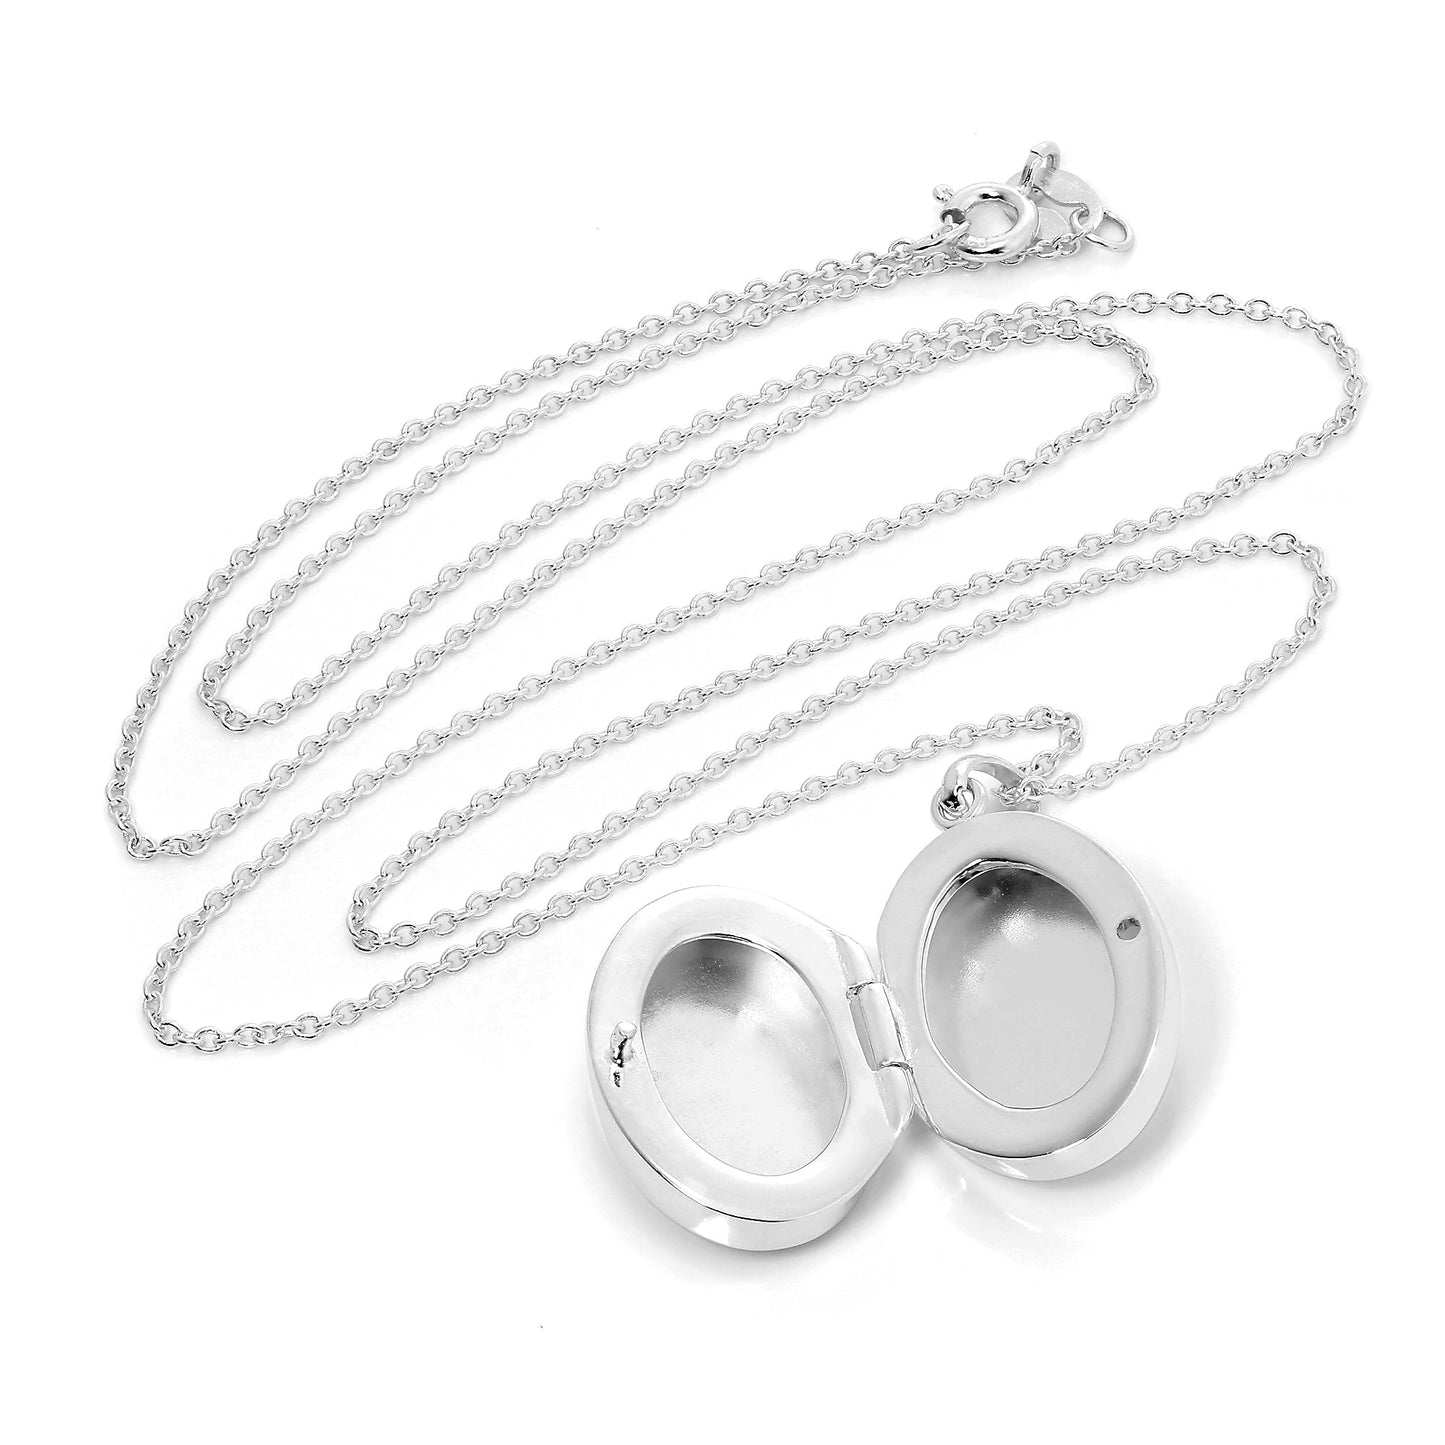 Sterling Silver Oval Locket Necklace on Chain